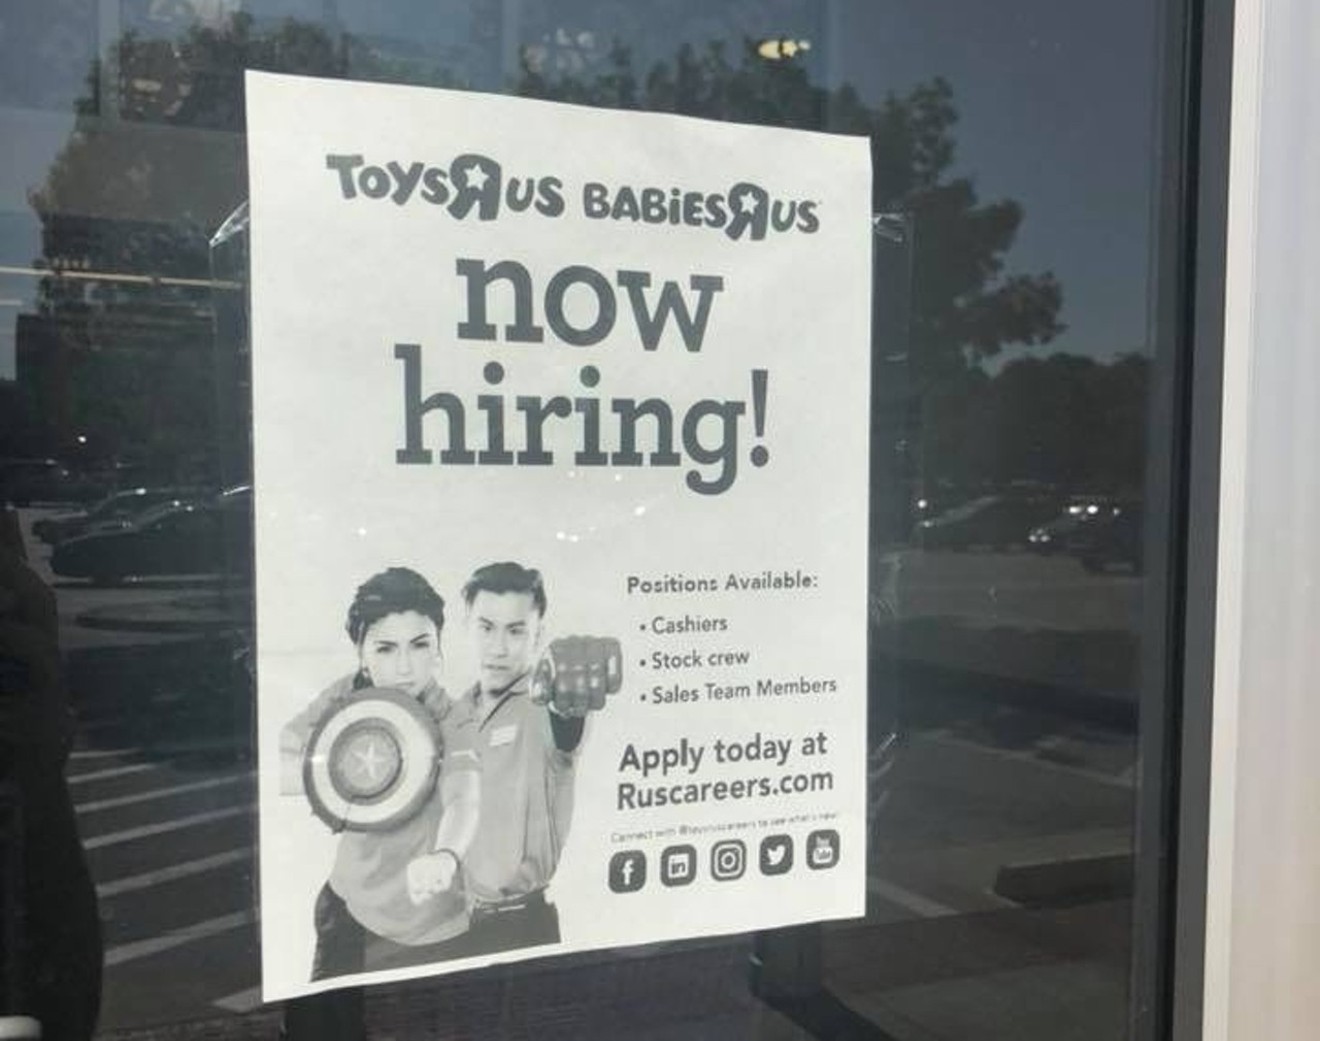 This sign appeared on Toys R Us' doors last week. Hmmm.